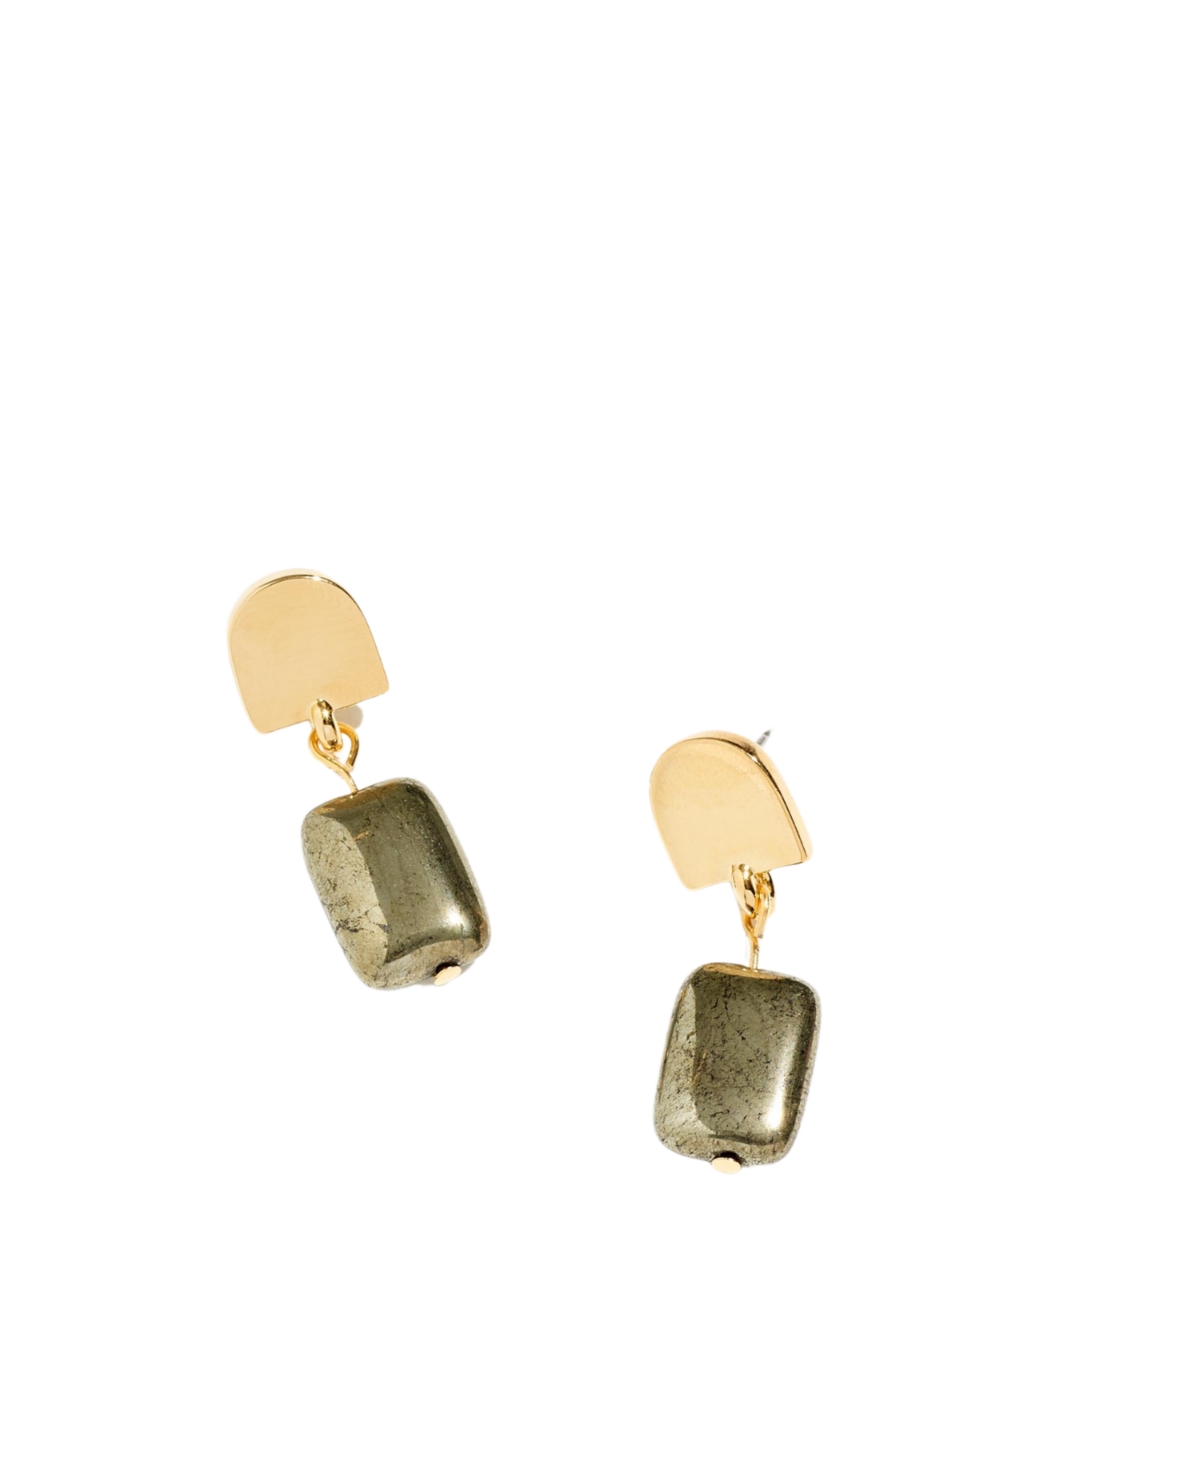 Dome + Pyrite Earrings - Gold